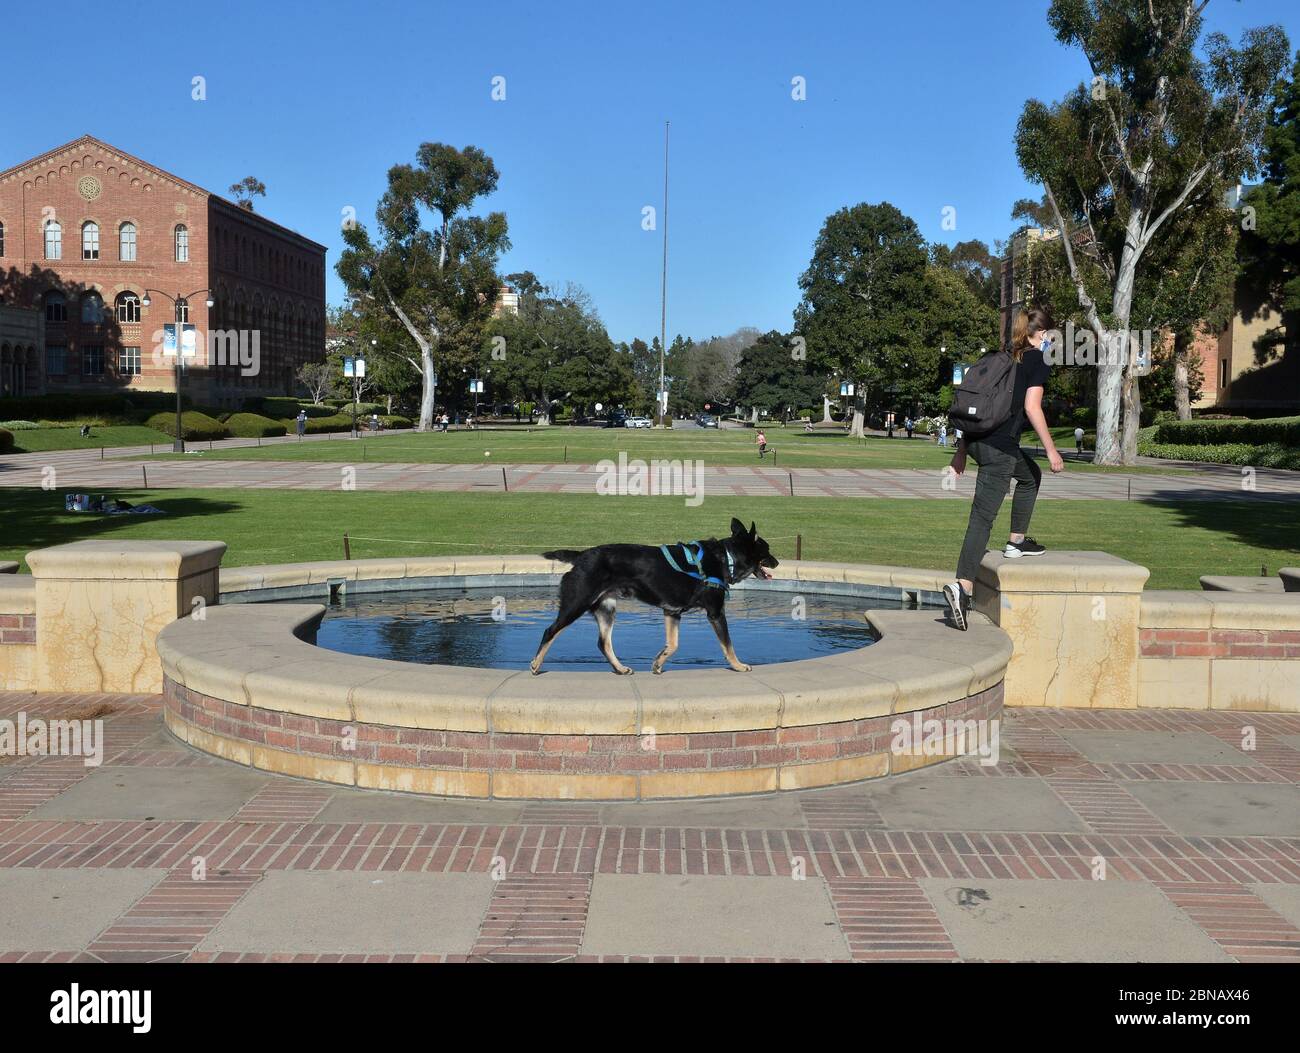 A student trains her dog in the quad near Royce Hall on the UCLA campus in Los Angeles on Wednesday, May 13, 2020. California State University, the nation's largest four-year college system, plans to cancel most in-person classes in the fall and instead offer instruction primarily online, Chancellor Timothy White announced Tuesday. The vast majority of classes across the 23-campus Cal State system will be taught online, White said, with some limited exceptions that allow for in-person activity. 'Our university, when open without restrictions and fully in person is a place where over 500,000 pe Stock Photo